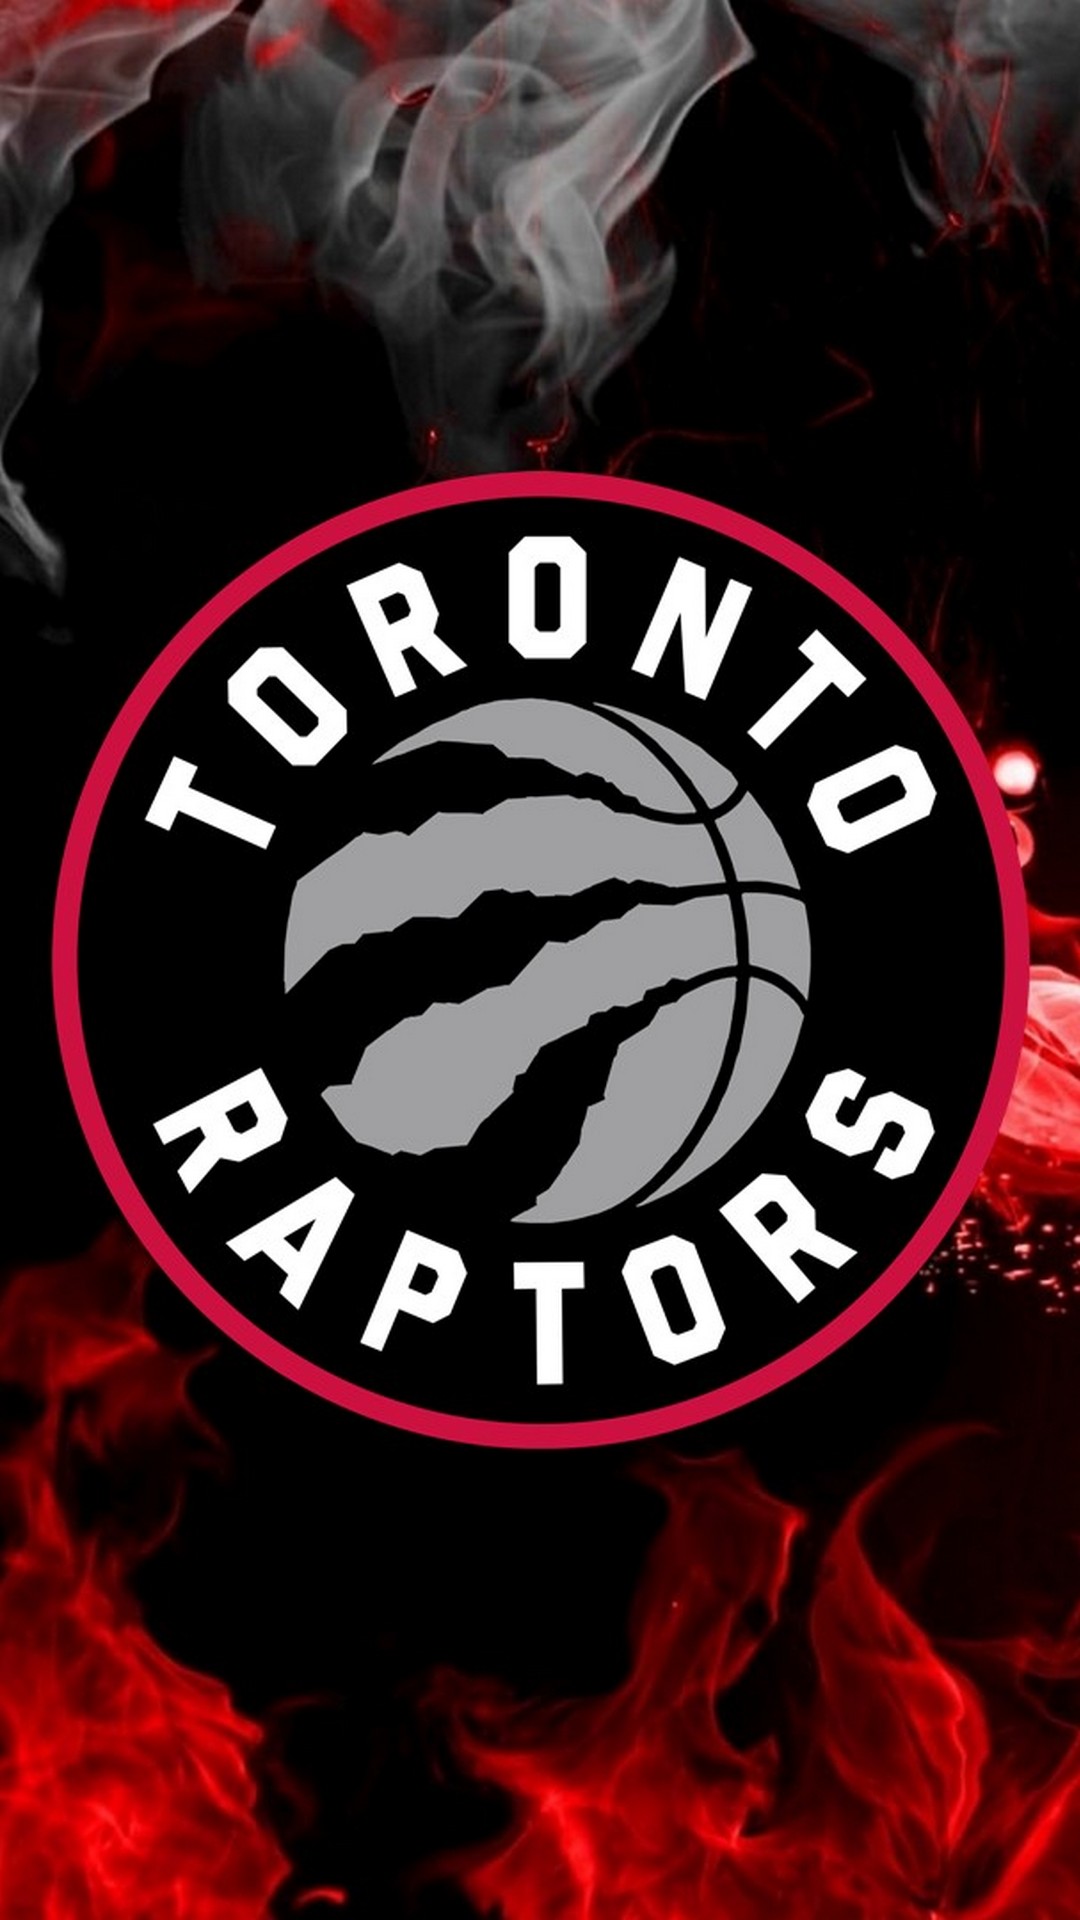 Toronto Raptors Wallpaper For iPhone with resolution 1080X1920 pixel. You can make this wallpaper for your iPhone 5, 6, 7, 8, X backgrounds, Mobile Screensaver, or iPad Lock Screen